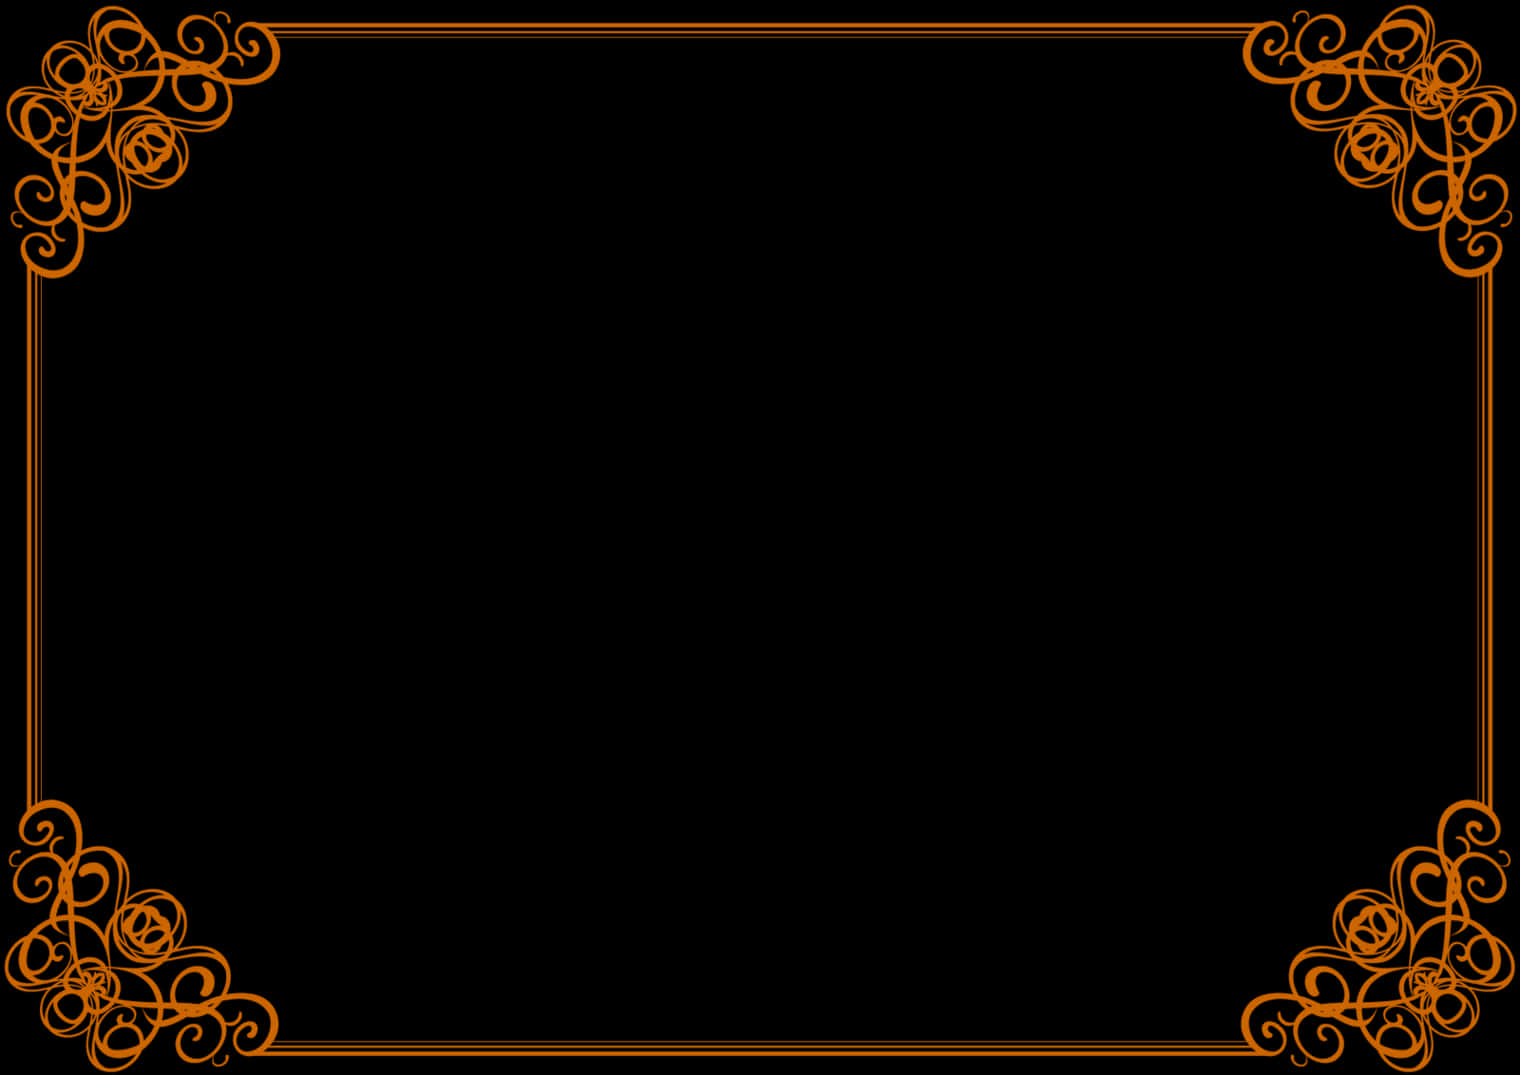 A Black Background With Orange And Black Border